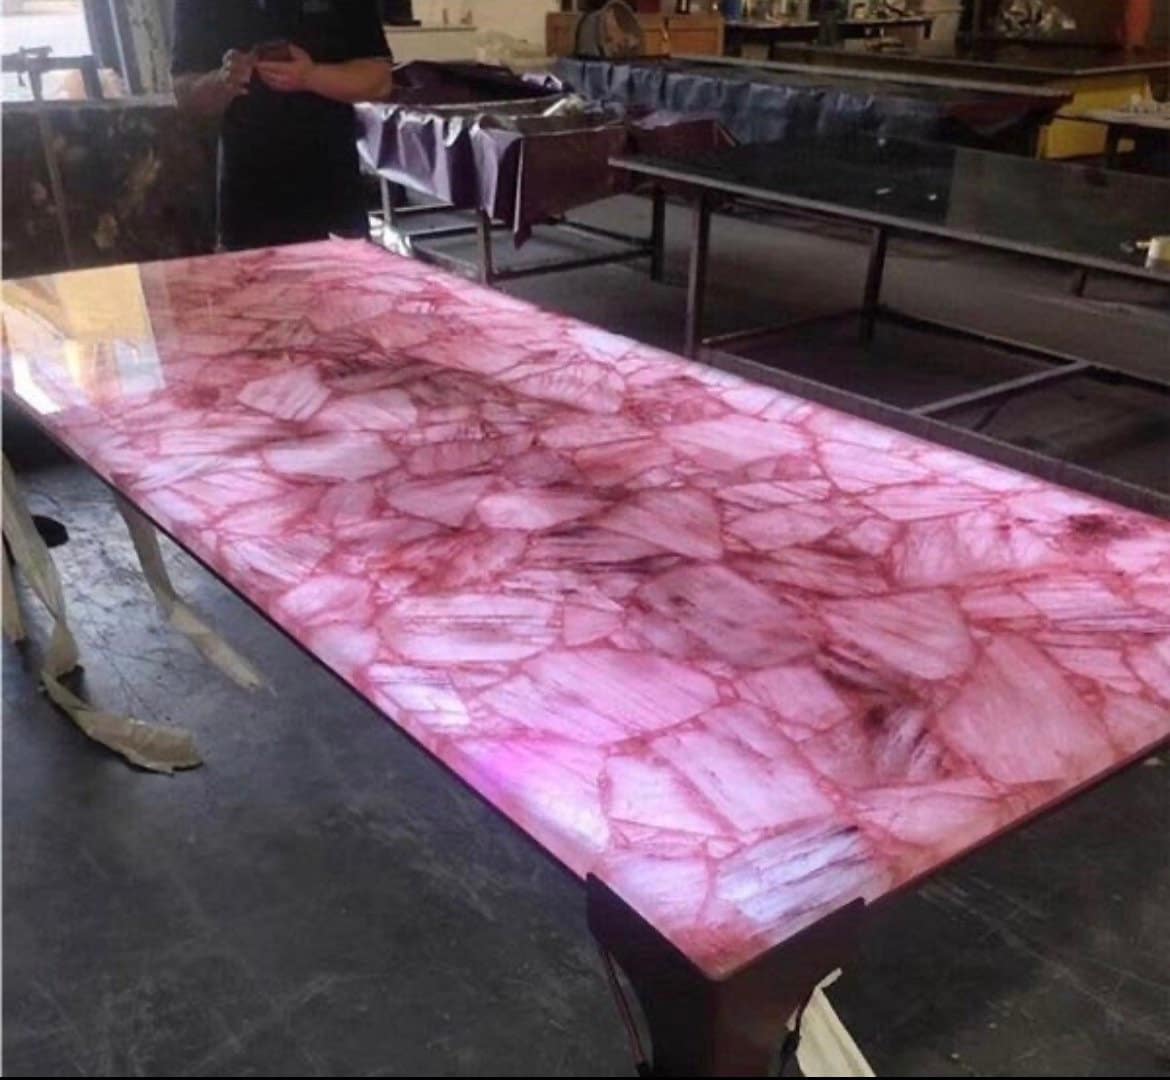 White Onyx Marble Table Top at Rs 1150/square feet